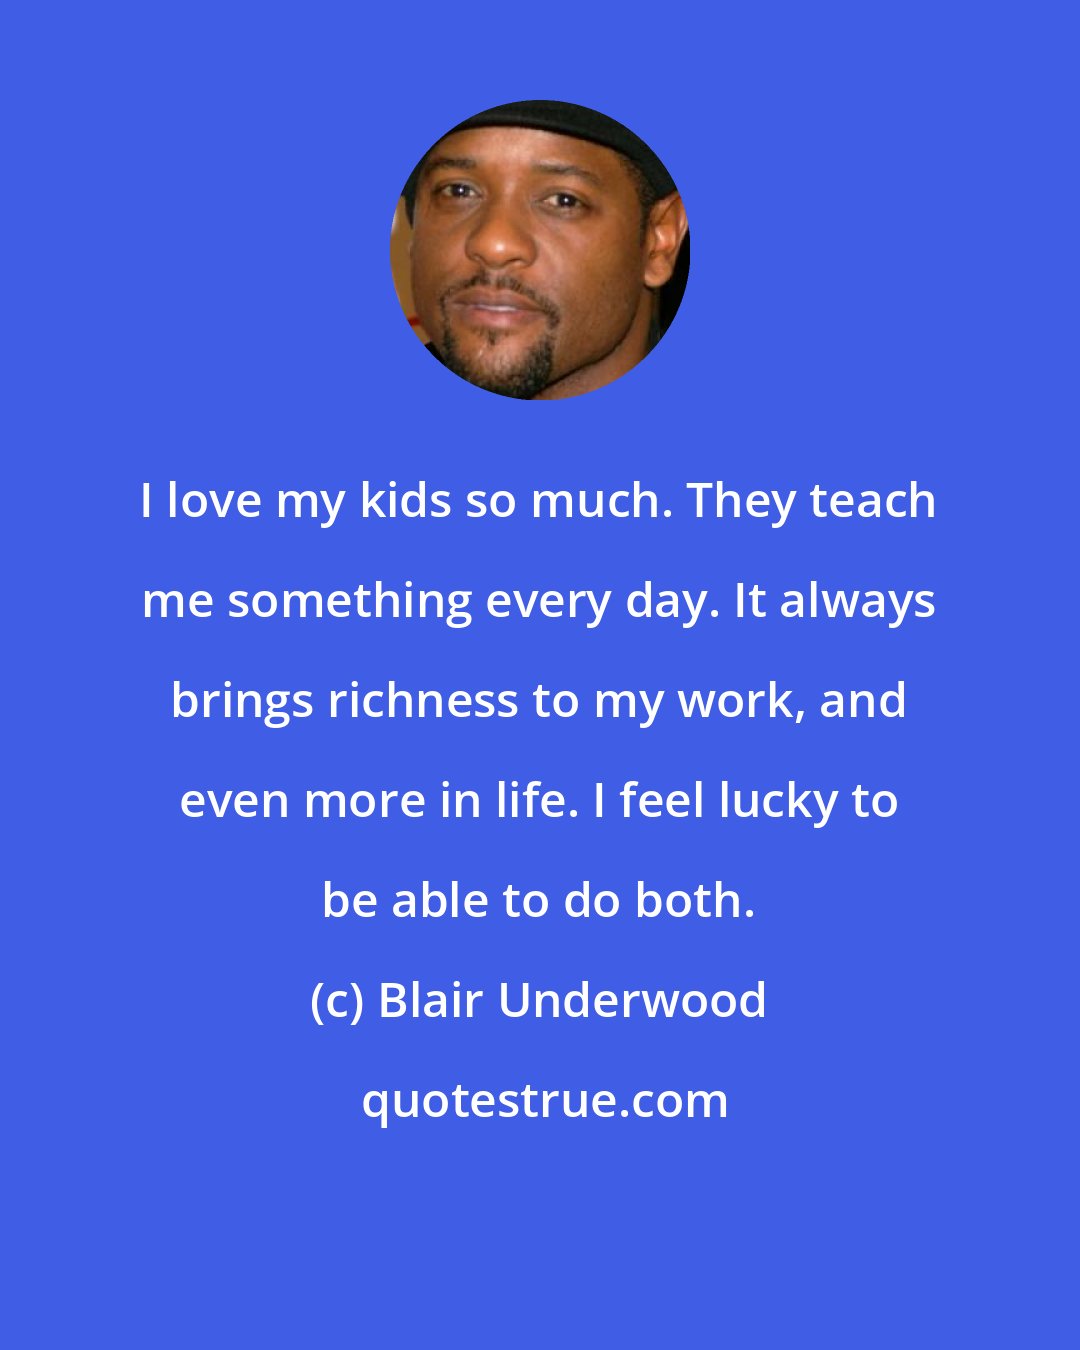 Blair Underwood: I love my kids so much. They teach me something every day. It always brings richness to my work, and even more in life. I feel lucky to be able to do both.